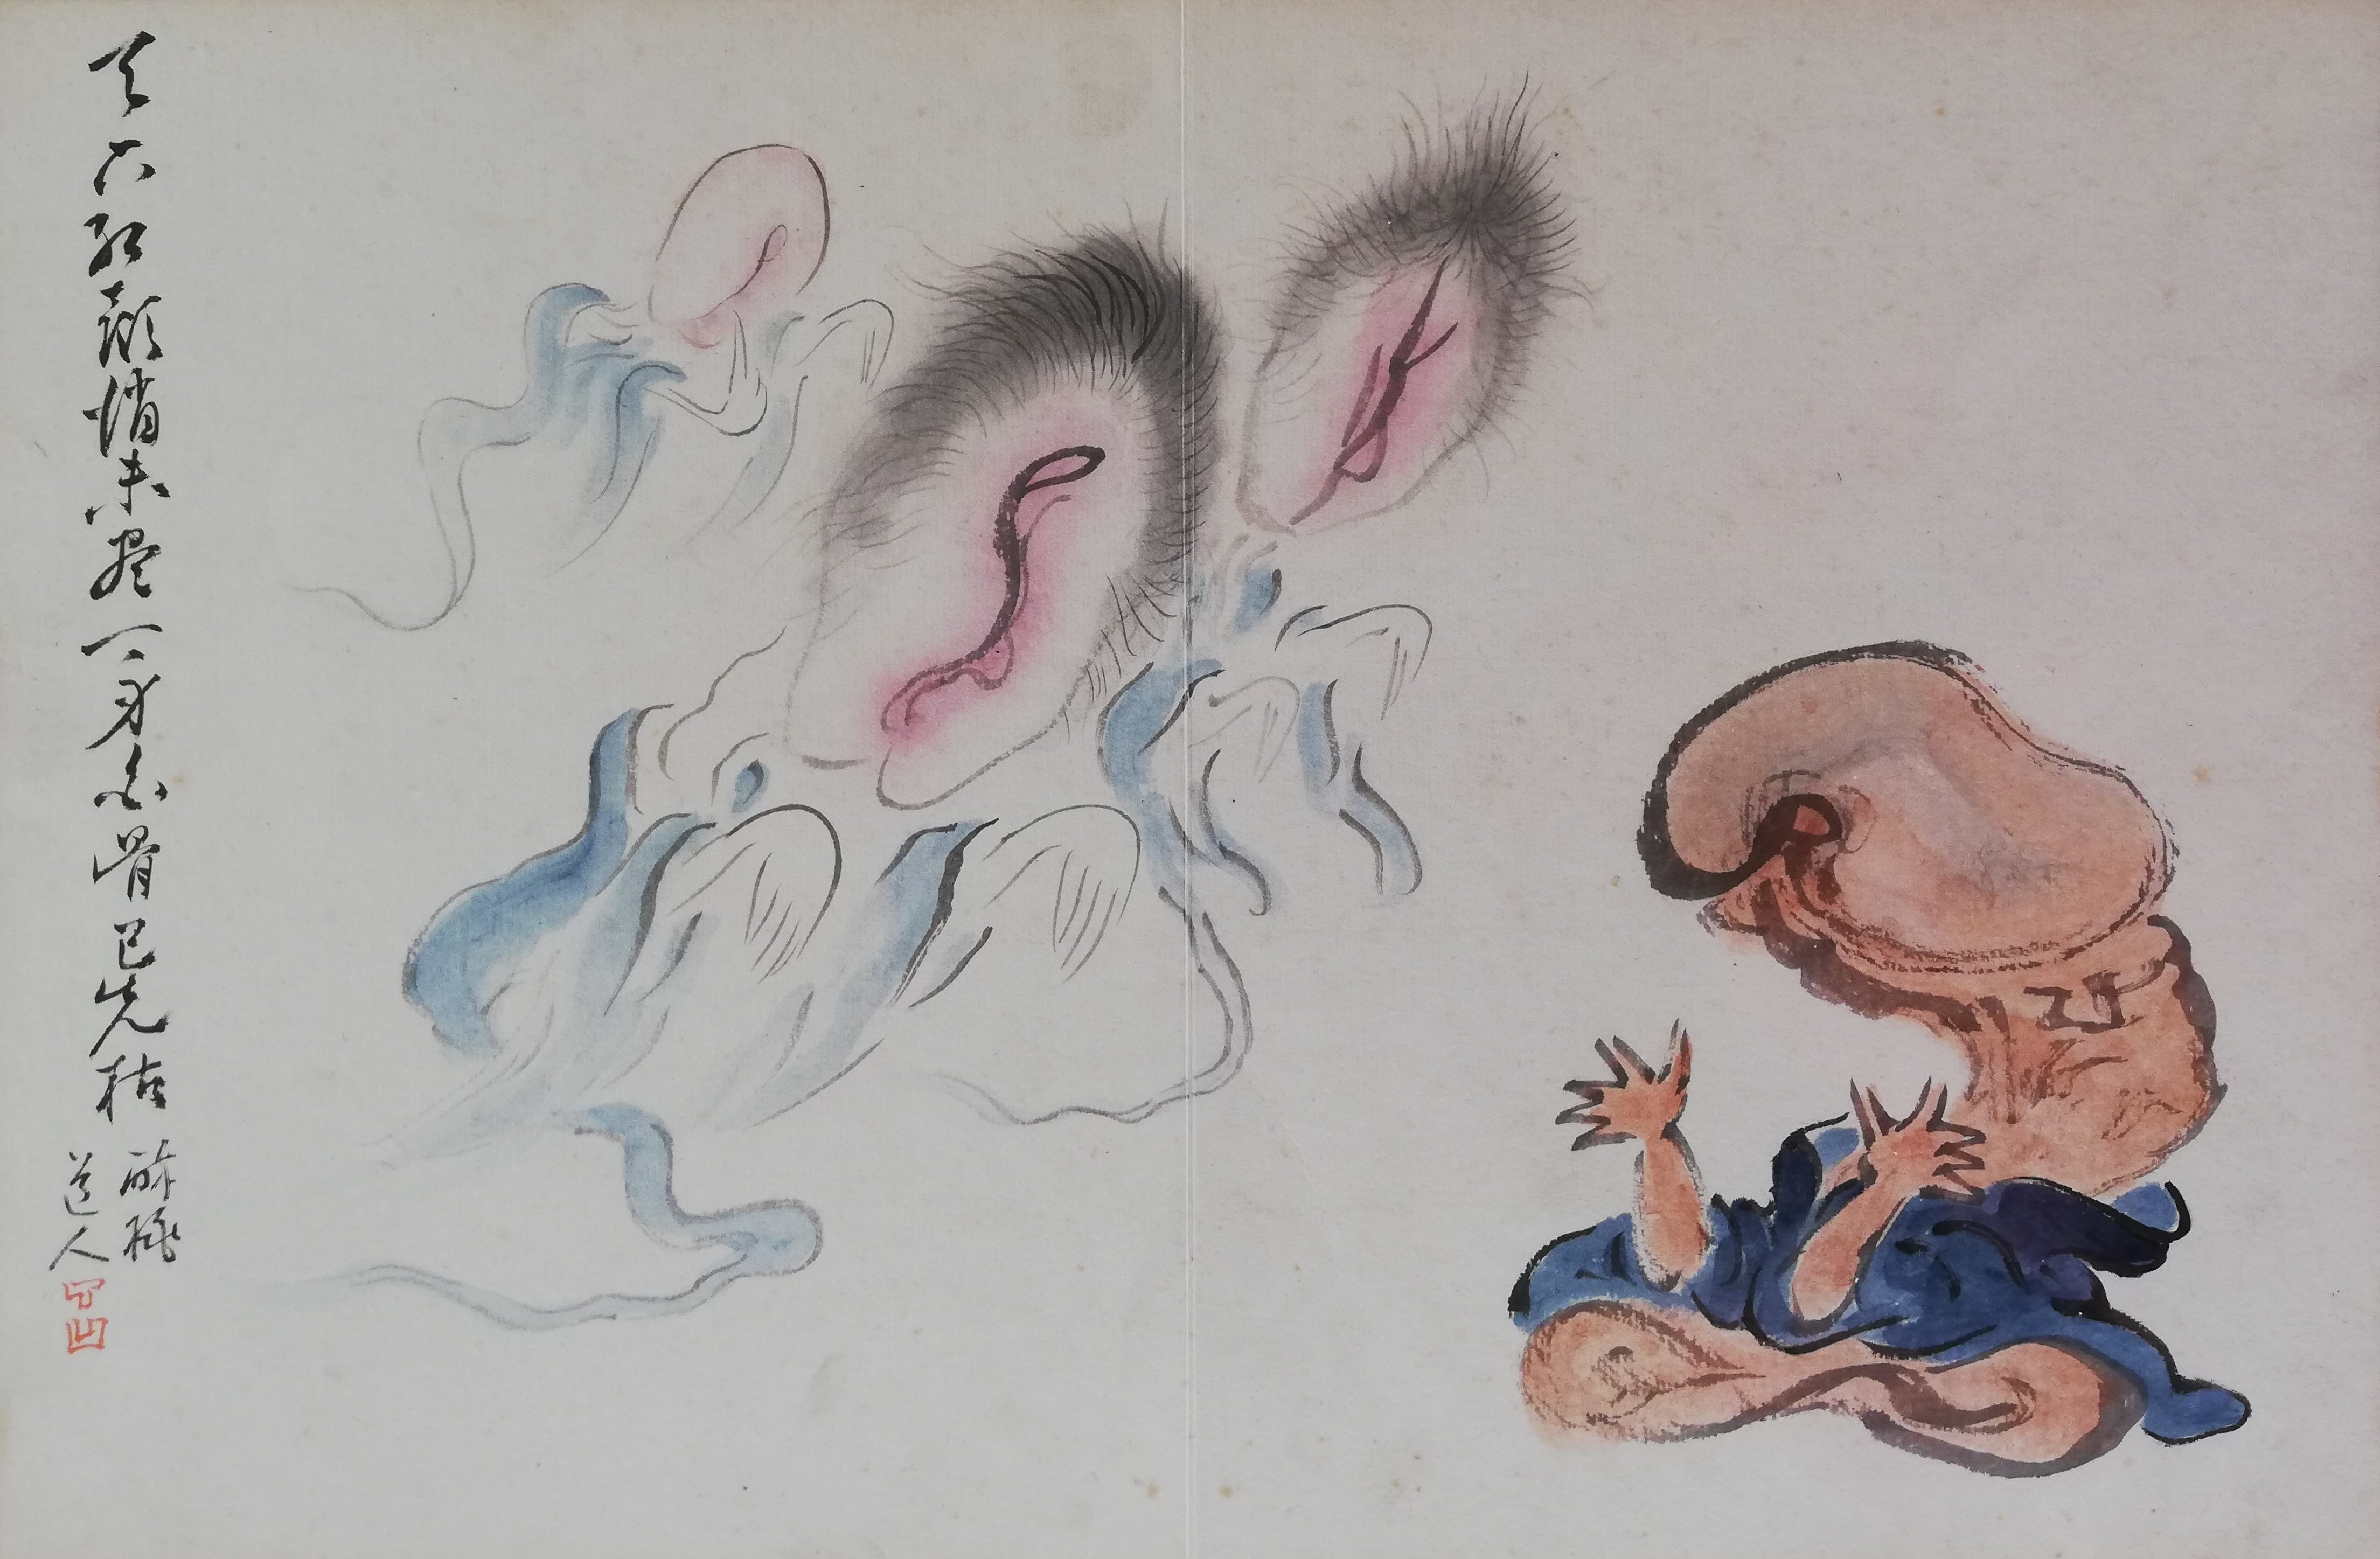 performing cunnilingus: A meditating Buddhist monk with a phallus-shaped head is taken off guard by the appearance of vulva-shaped spirits